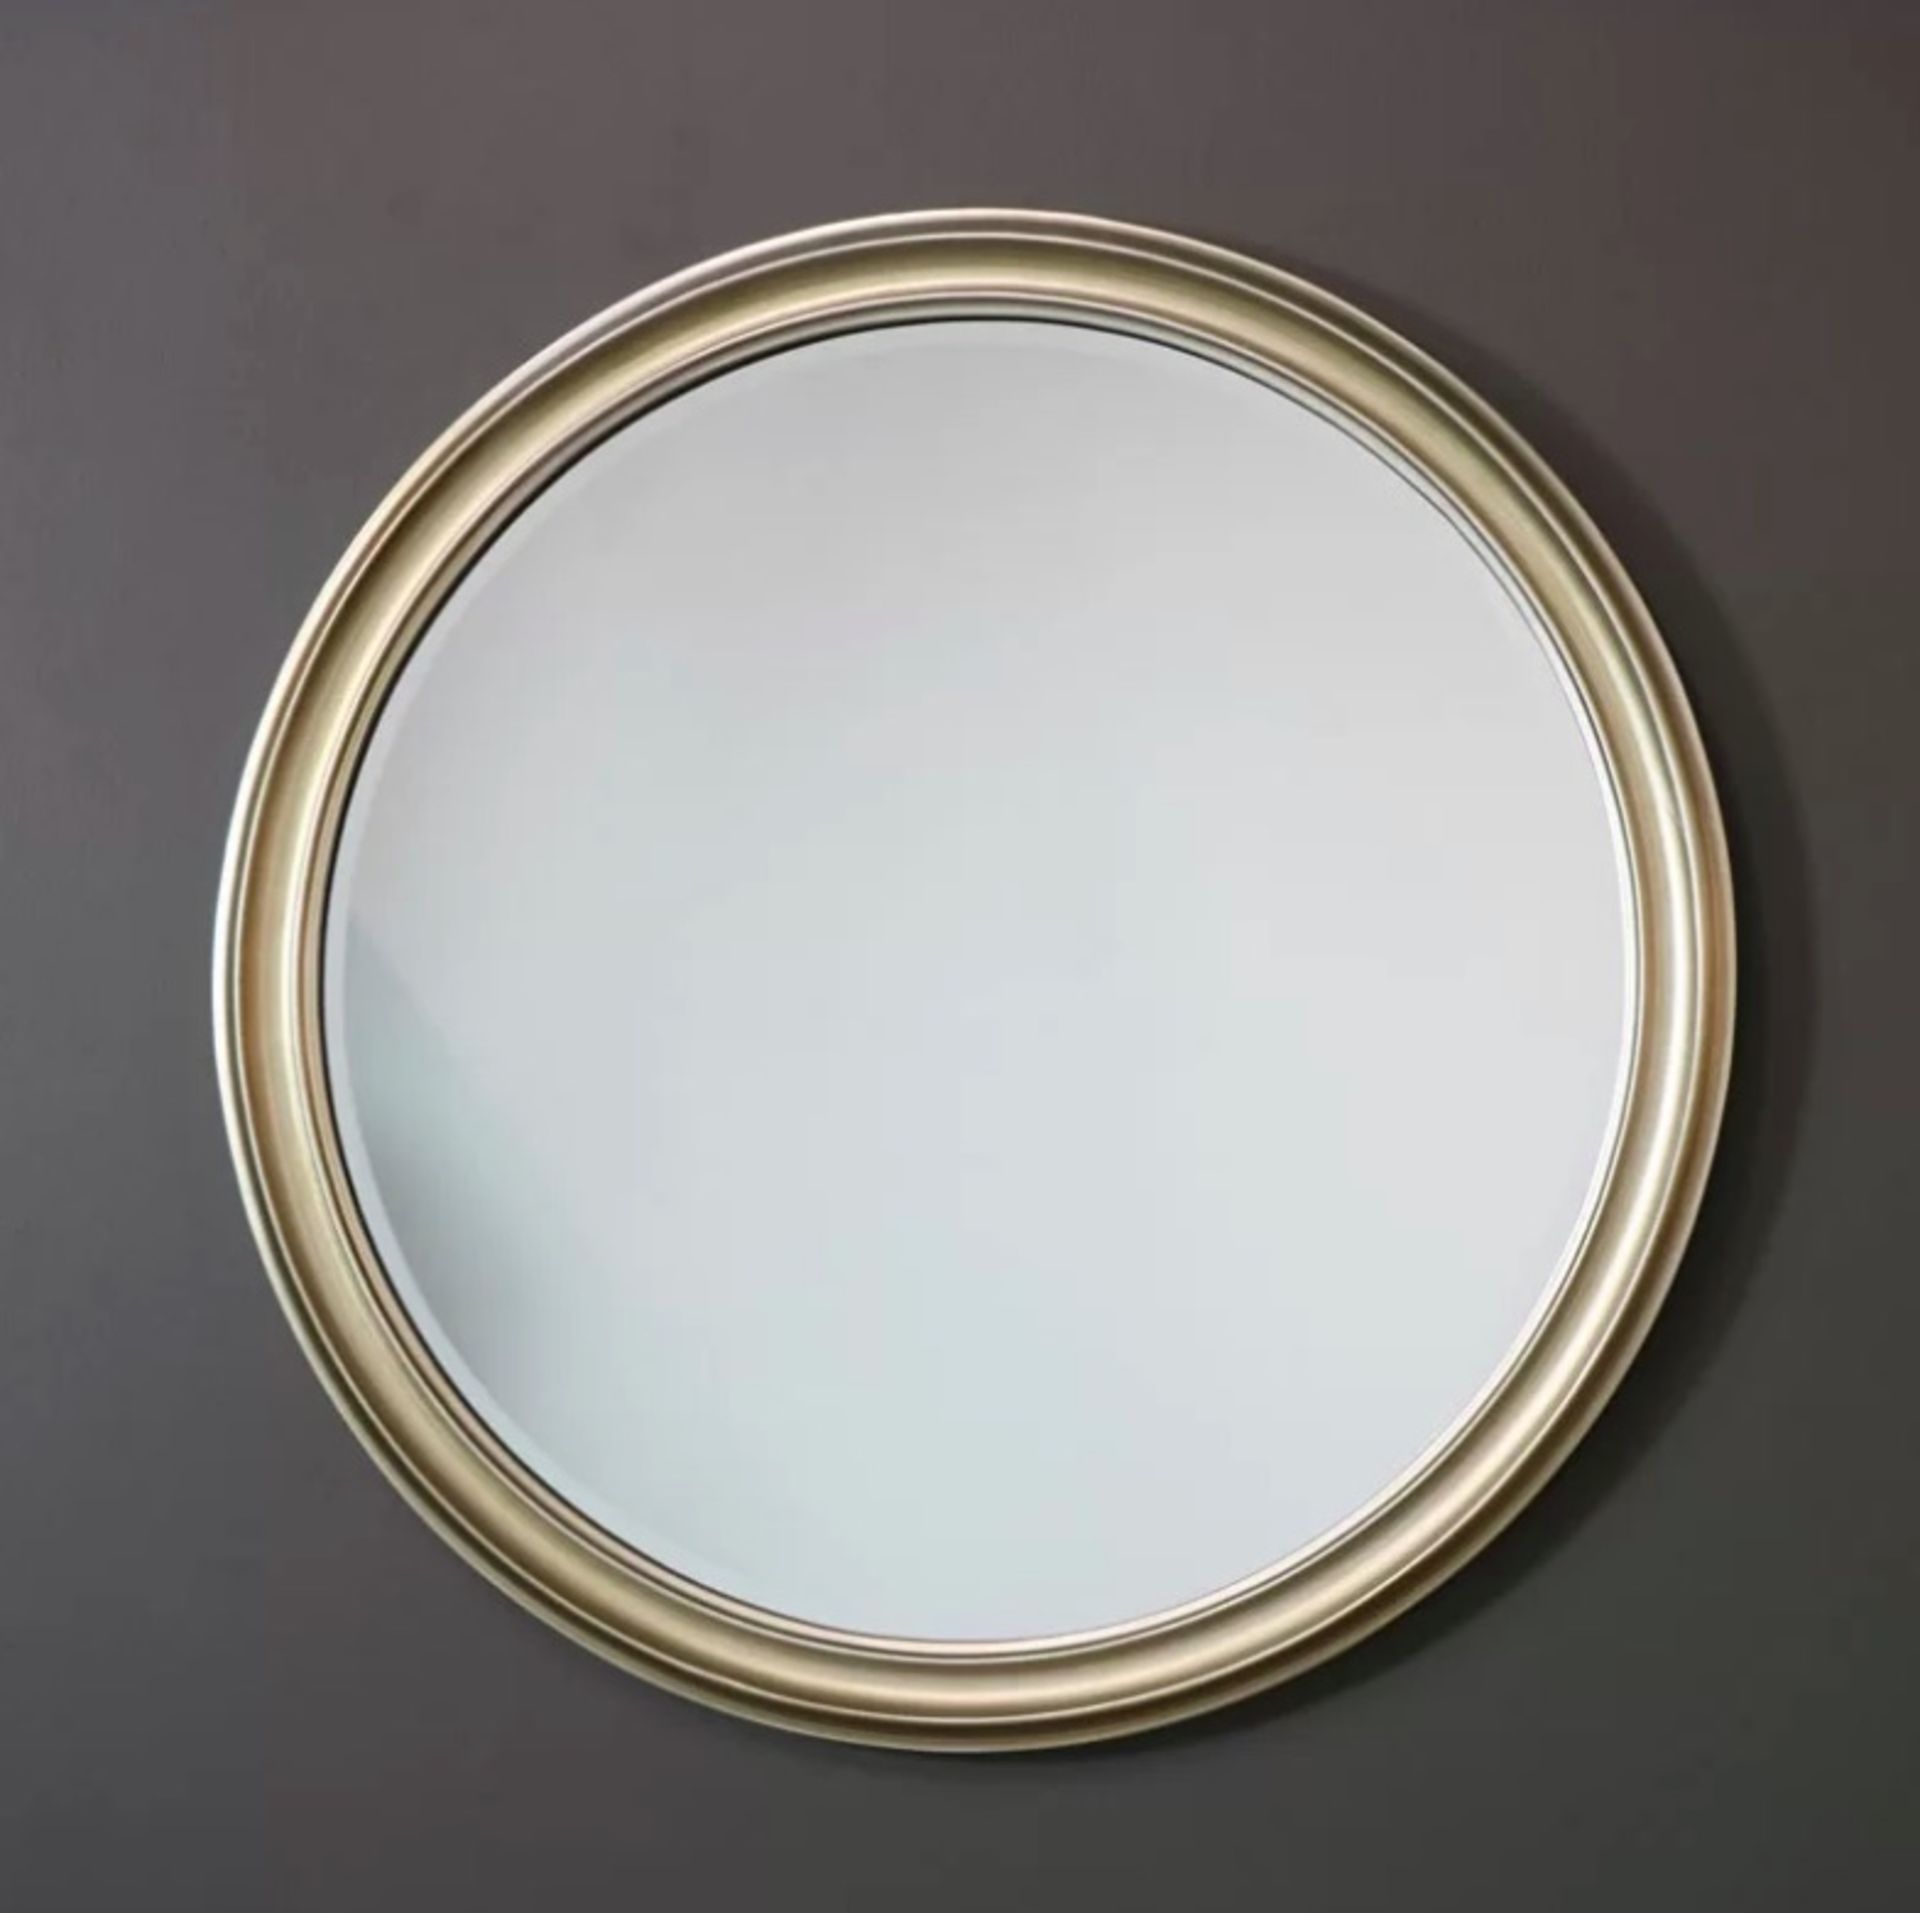 Zante Accent Mirror This effortlessly stylish accent mirror will add an elegant feature to a room.